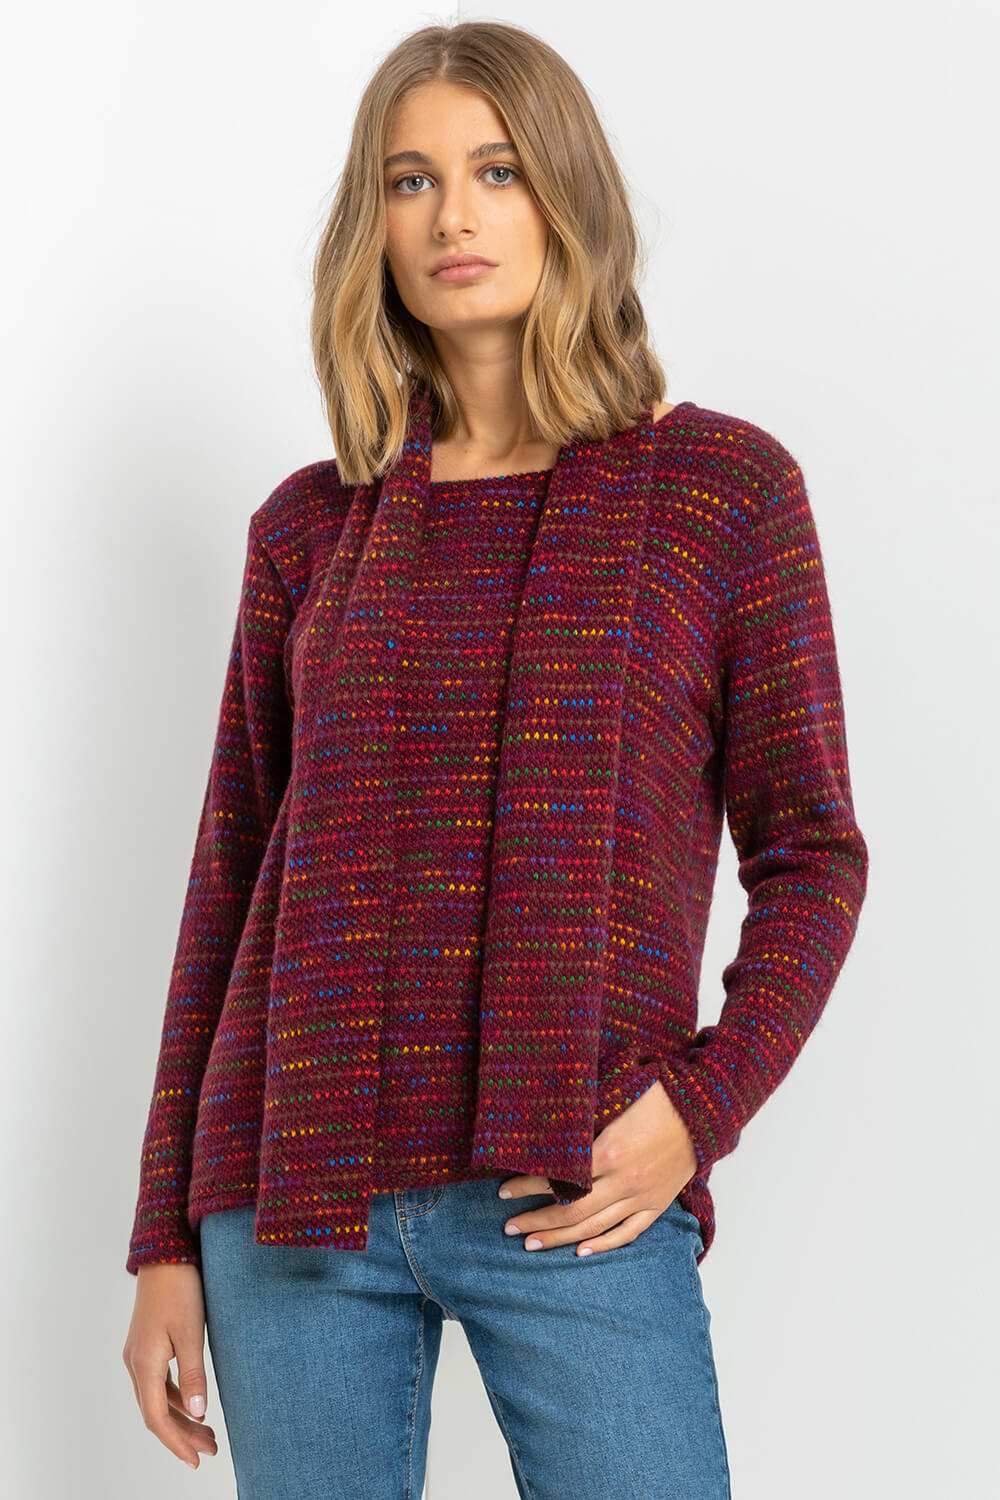 Textured Yarn Top with Scarf